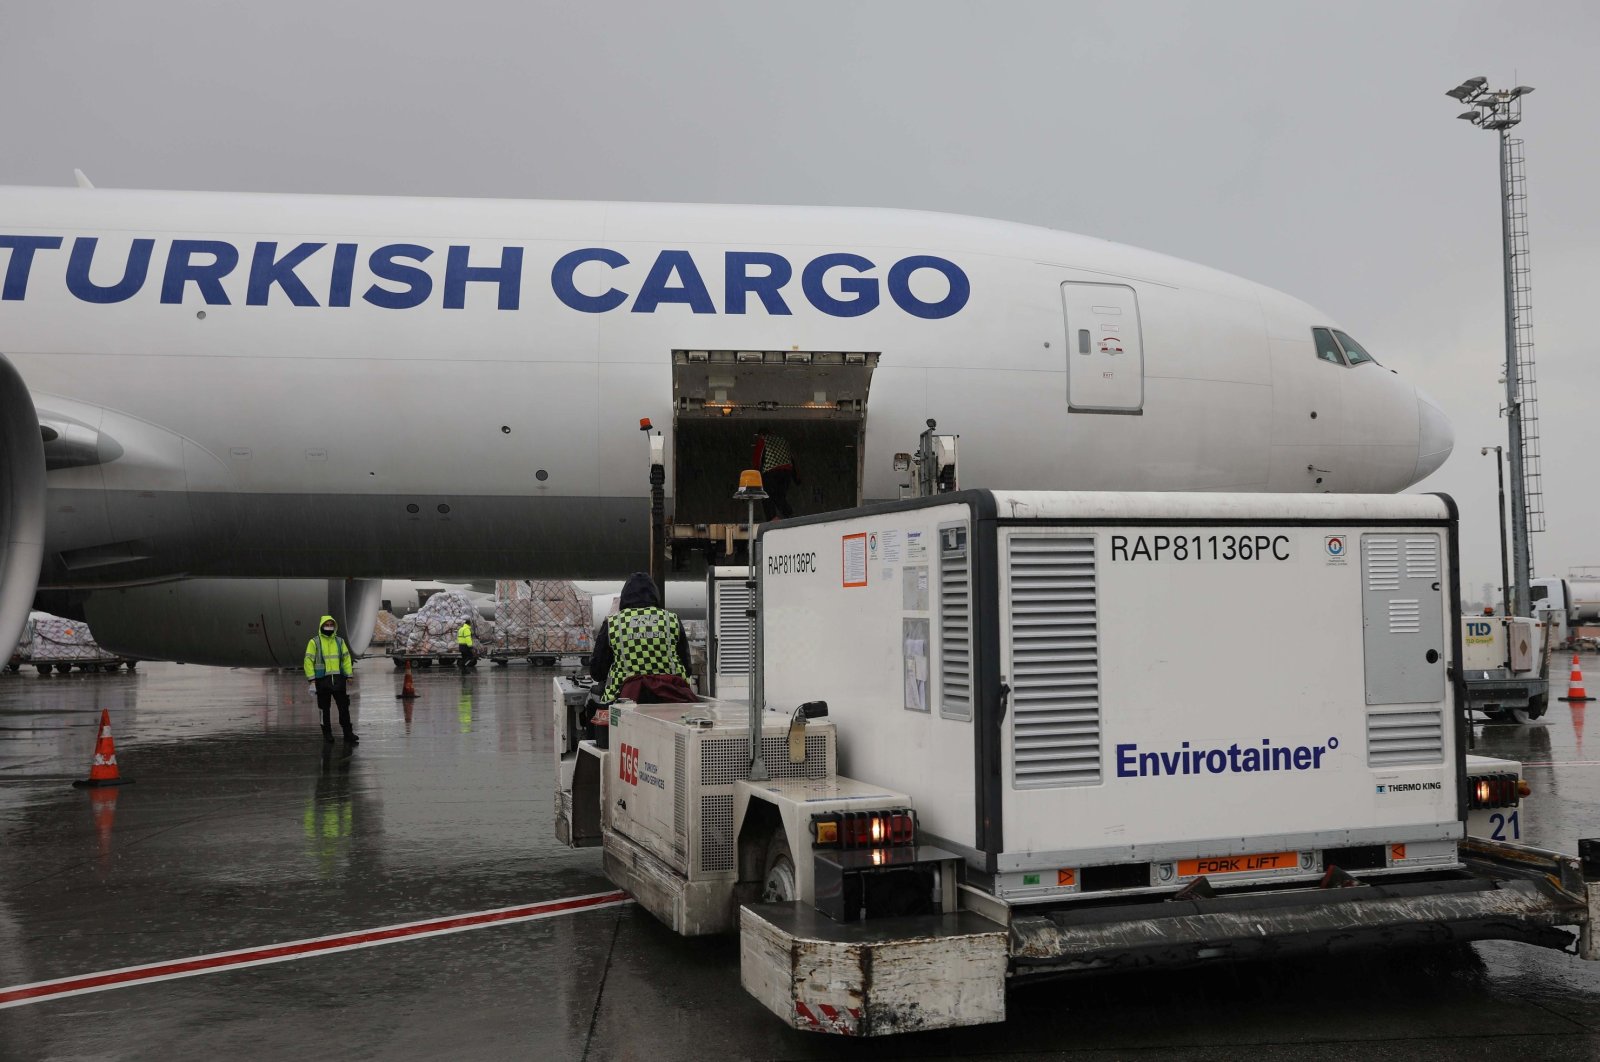 Temperature-controlled containers carrying China's Sinovac COVID-19 vaccines are loaded onto a Turkish Cargo plane at Atatürk airport before departing to Brazil, in Istanbul, Turkey, Nov. 18, 2020. (Turkish Airlines via Reuters)